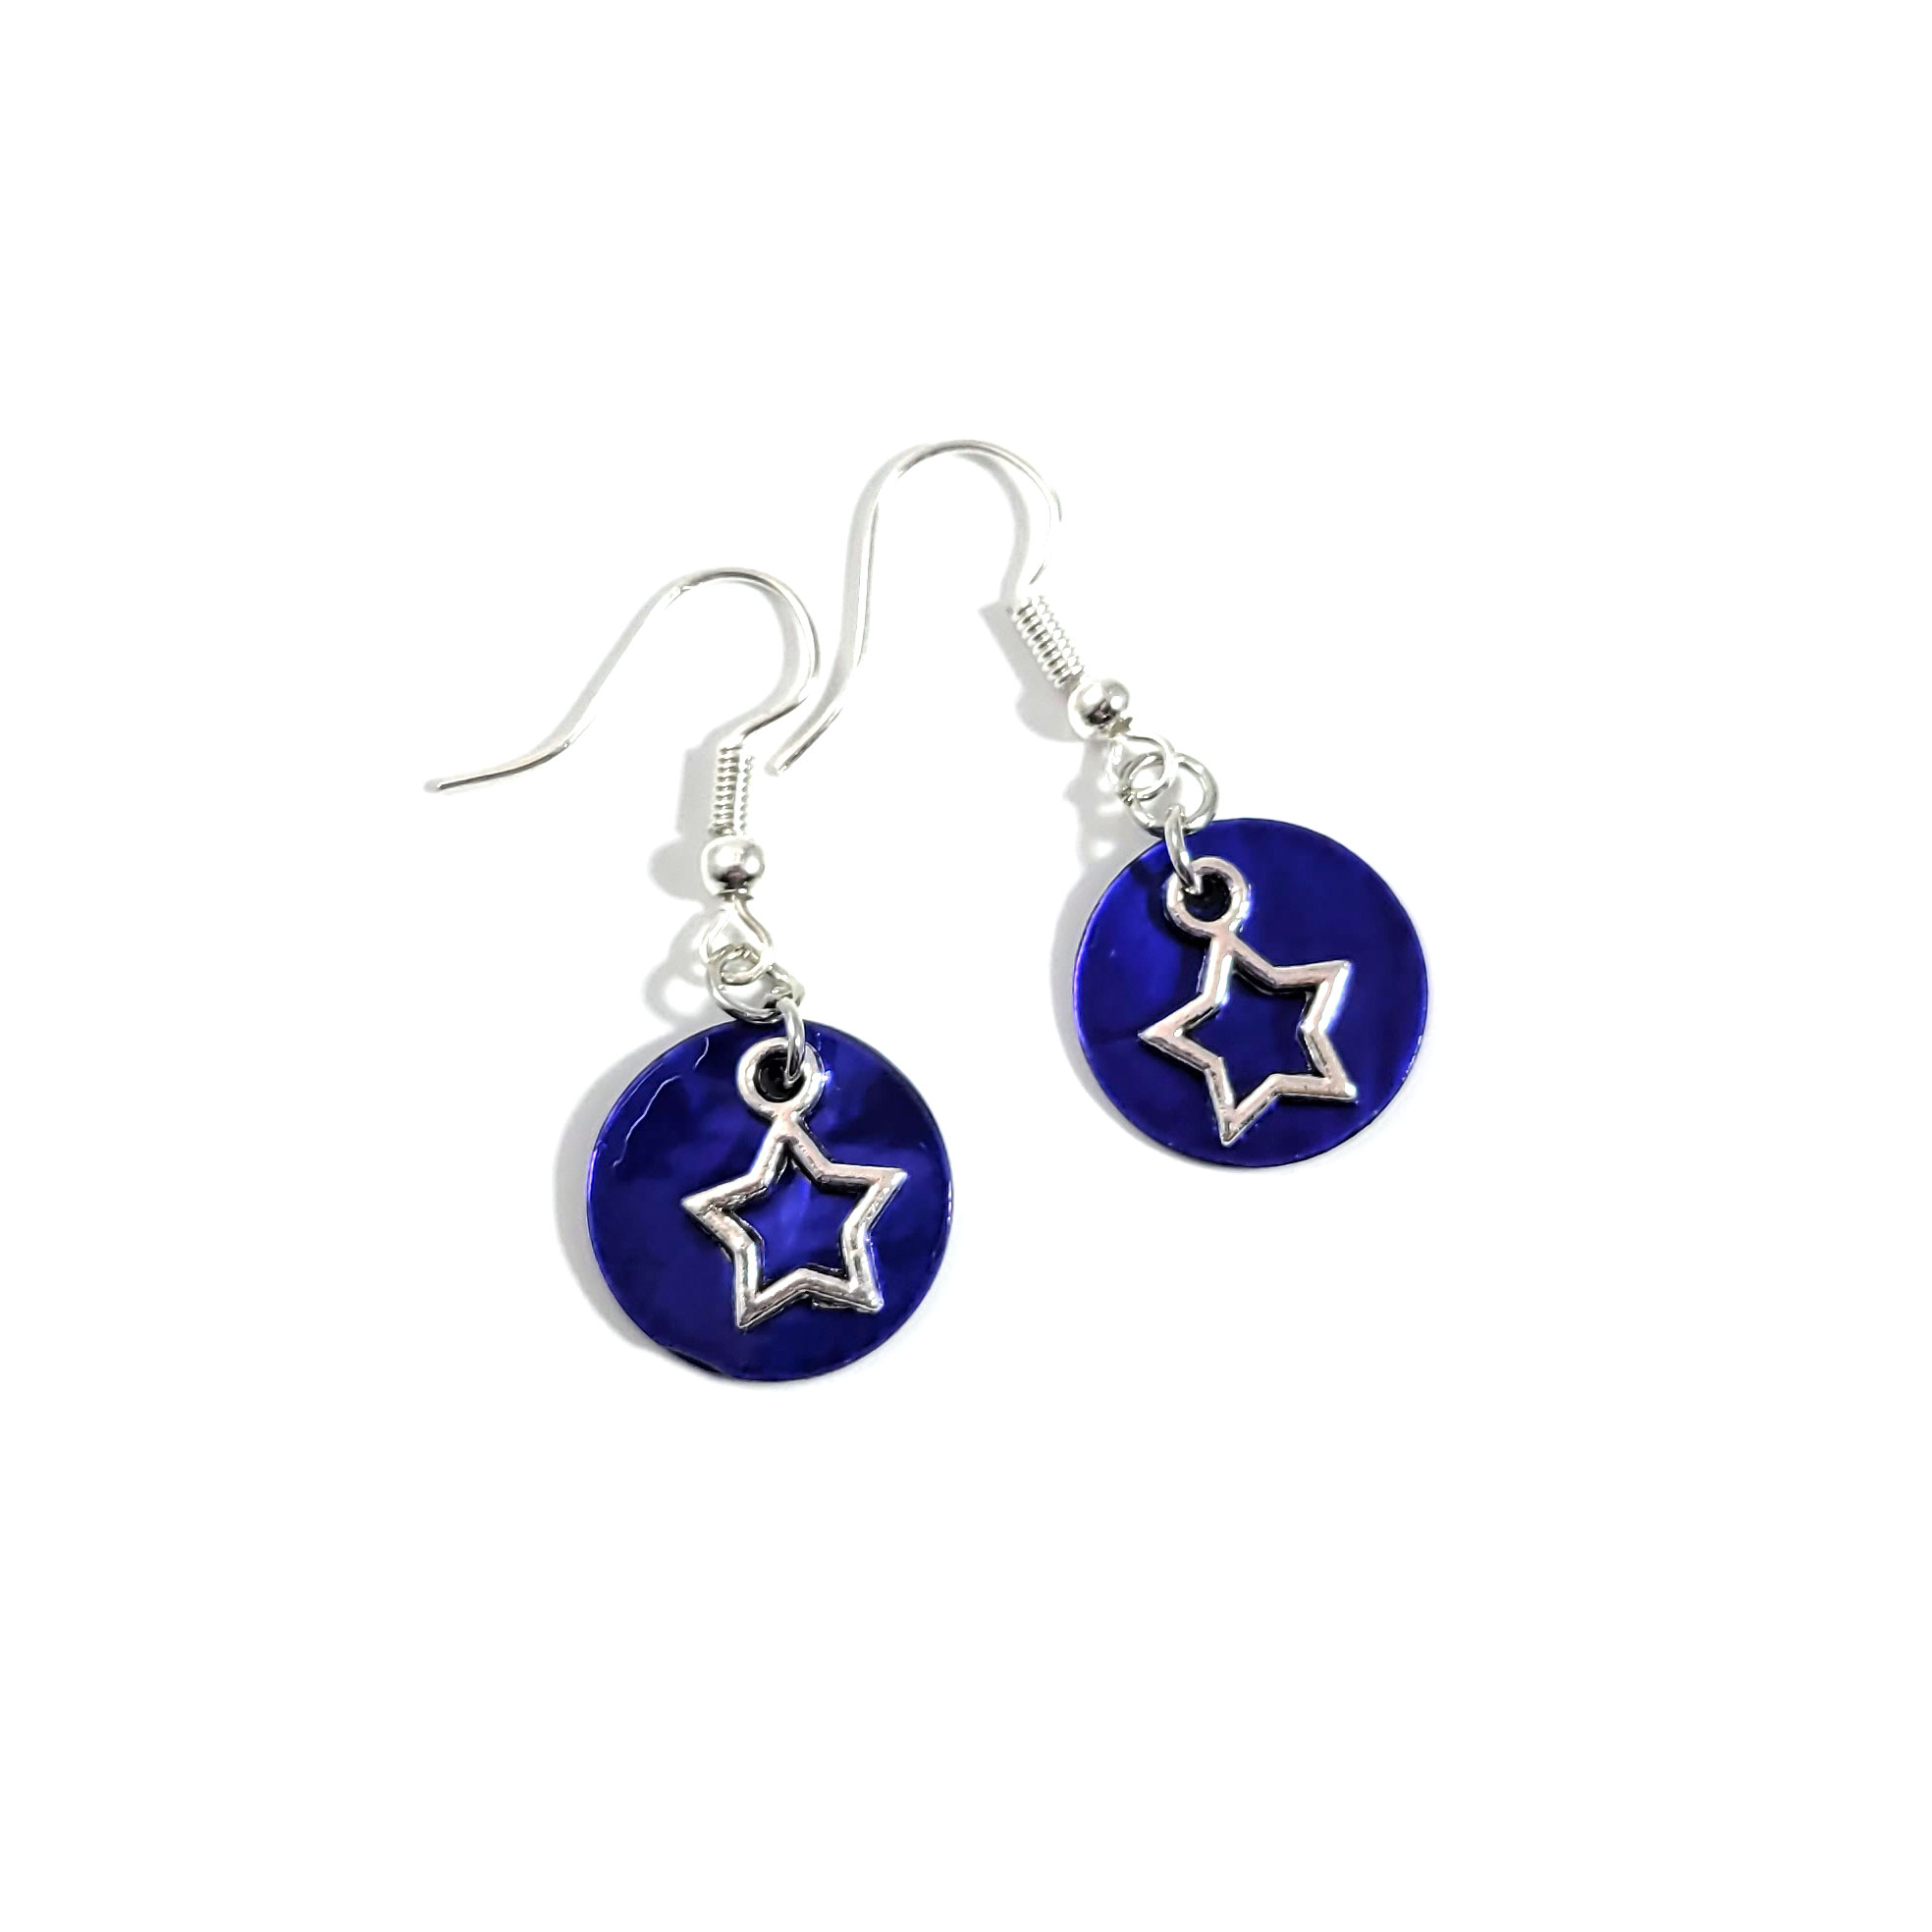 The Stars at Night Earrings by Wilde Designs